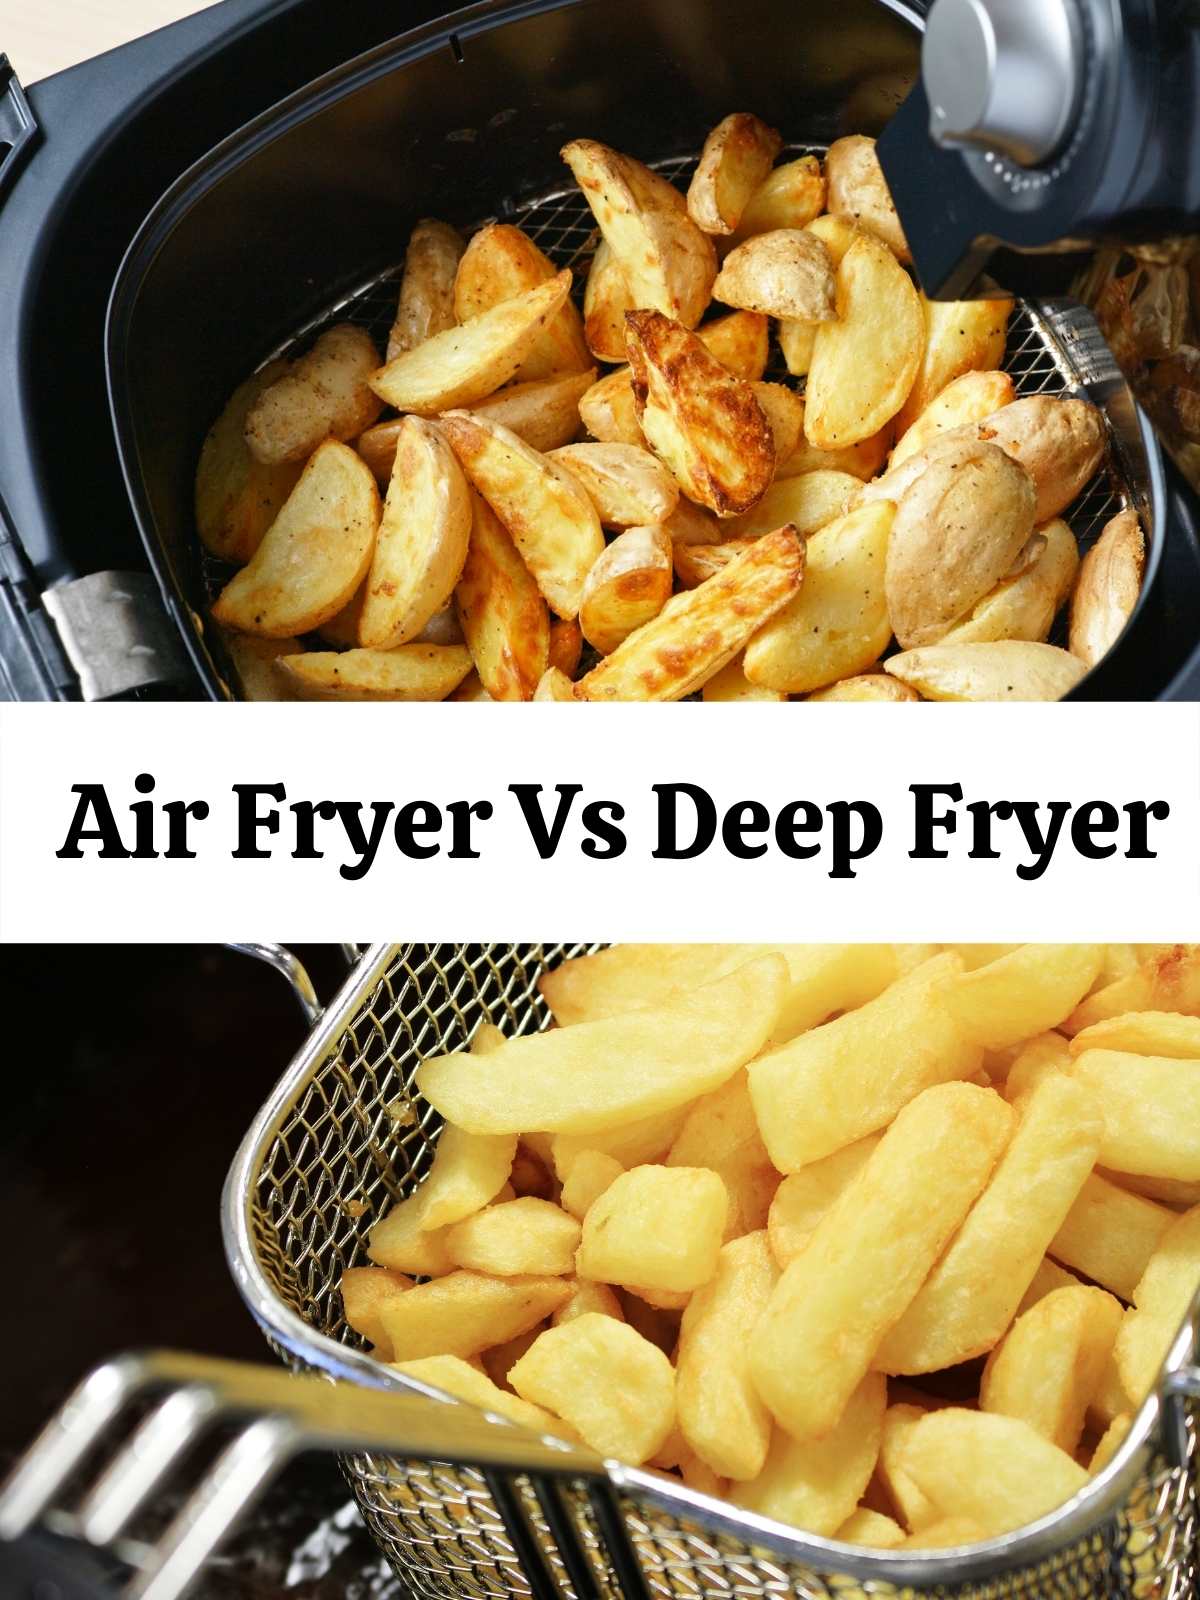 Image of an air fryer full of crispy potato fries above an image of a deep fryer basket with crispy potato fries. Text overlay "Air Fryer Vs Deep Fryer."